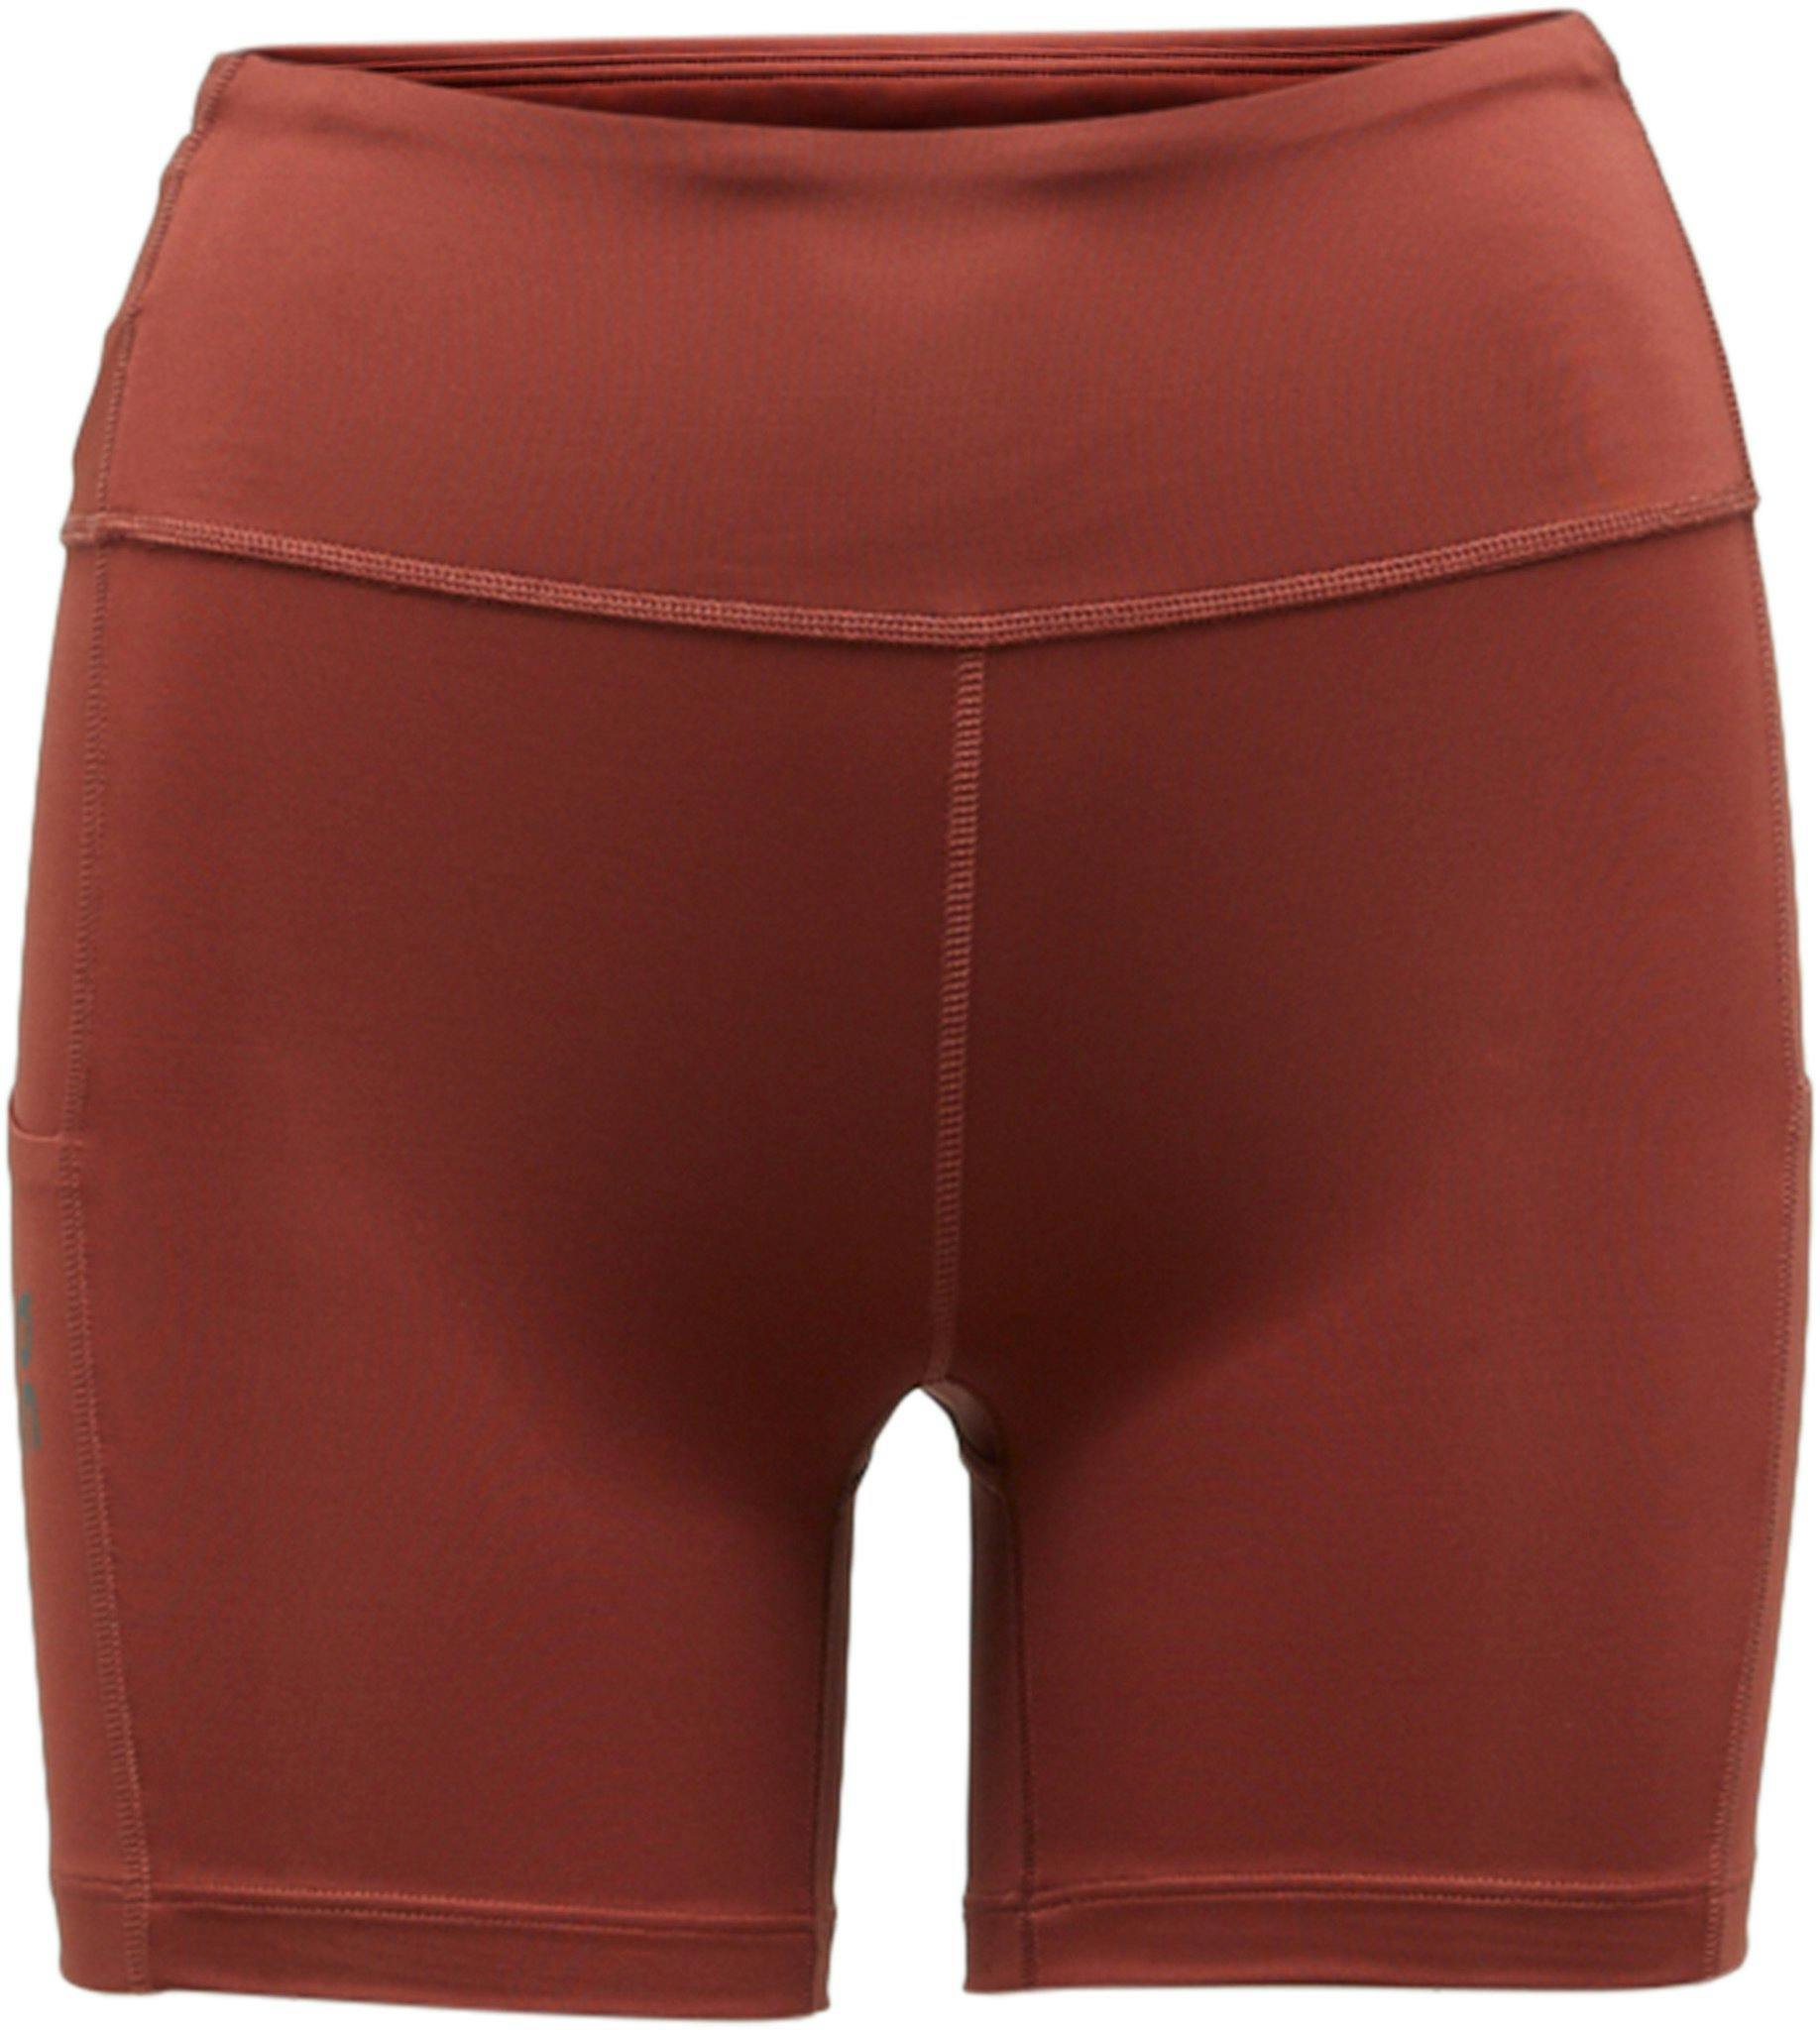 Product image for Performance Tight Shorts  - Women's